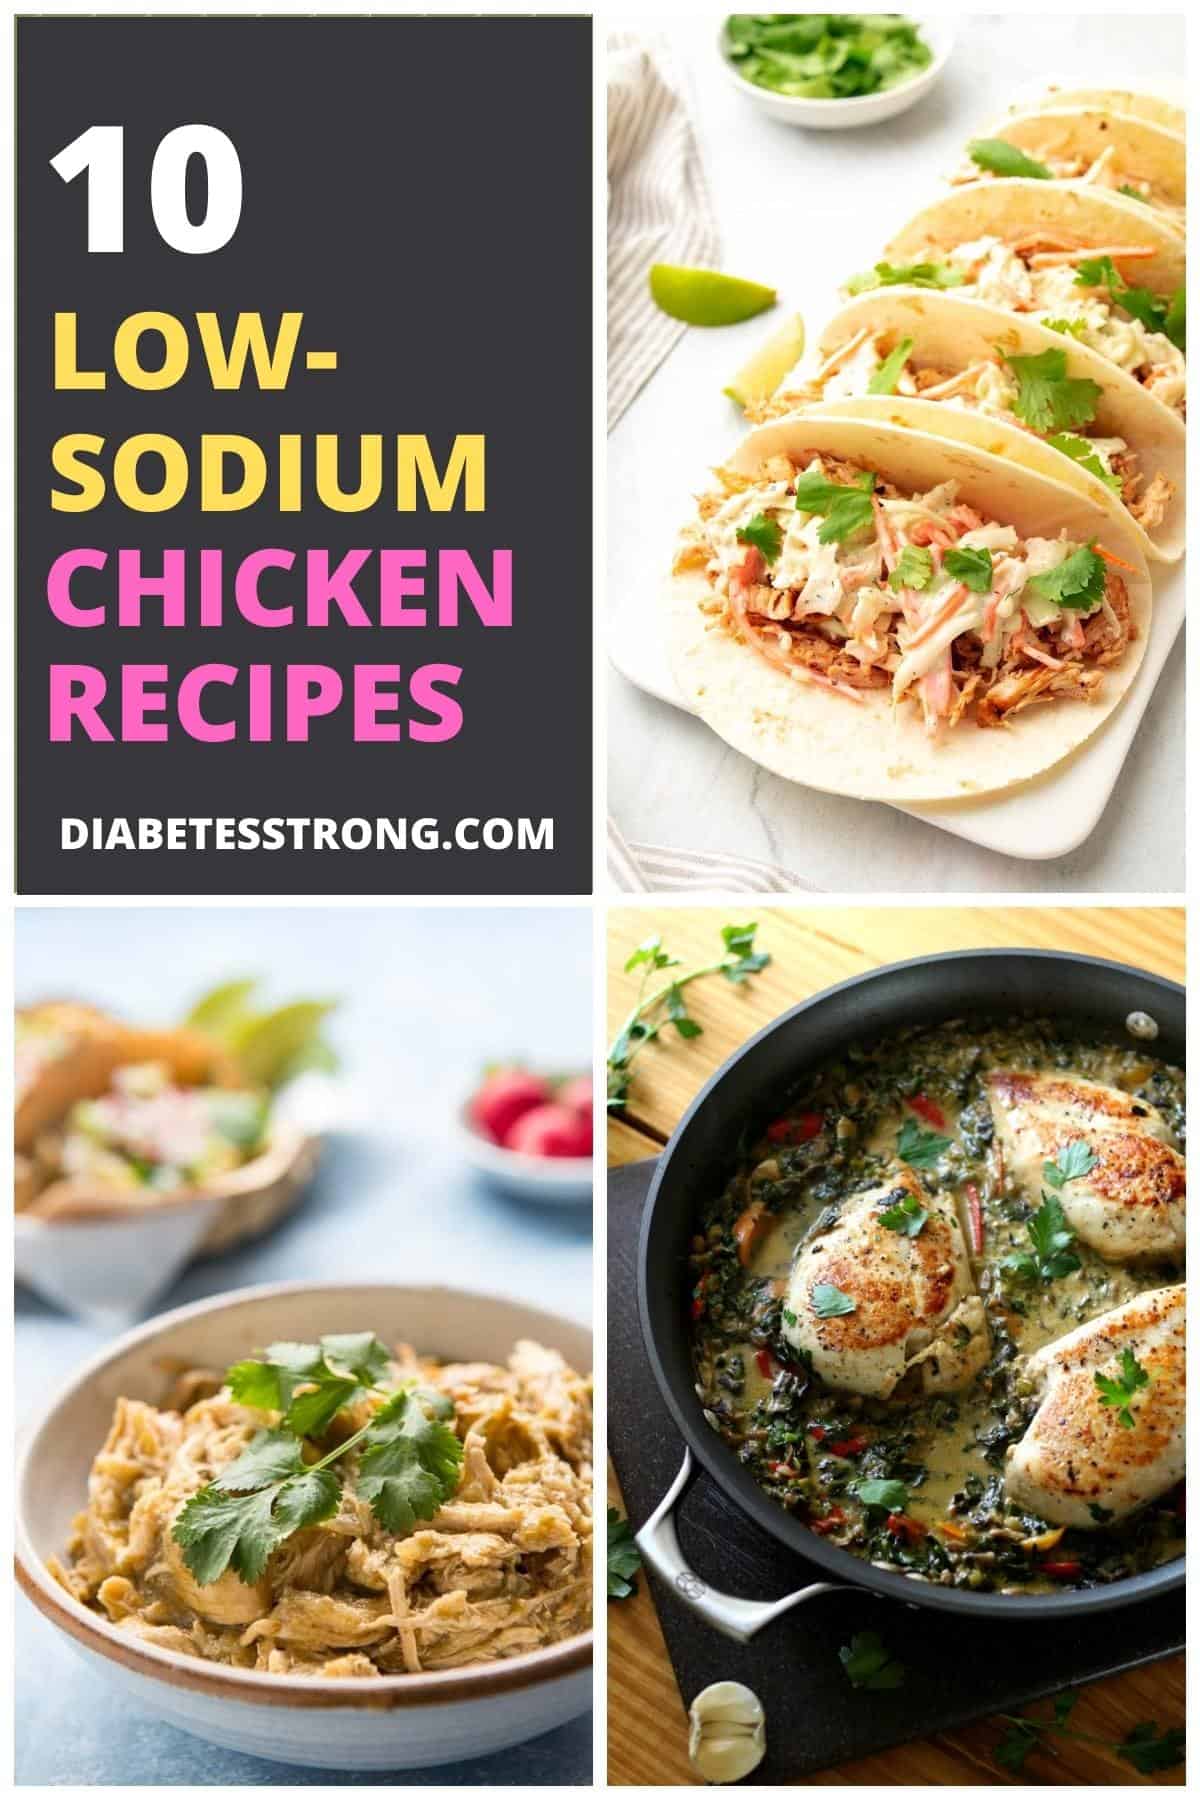 Low-Sodium Chicken Recipes (Low-Carb)